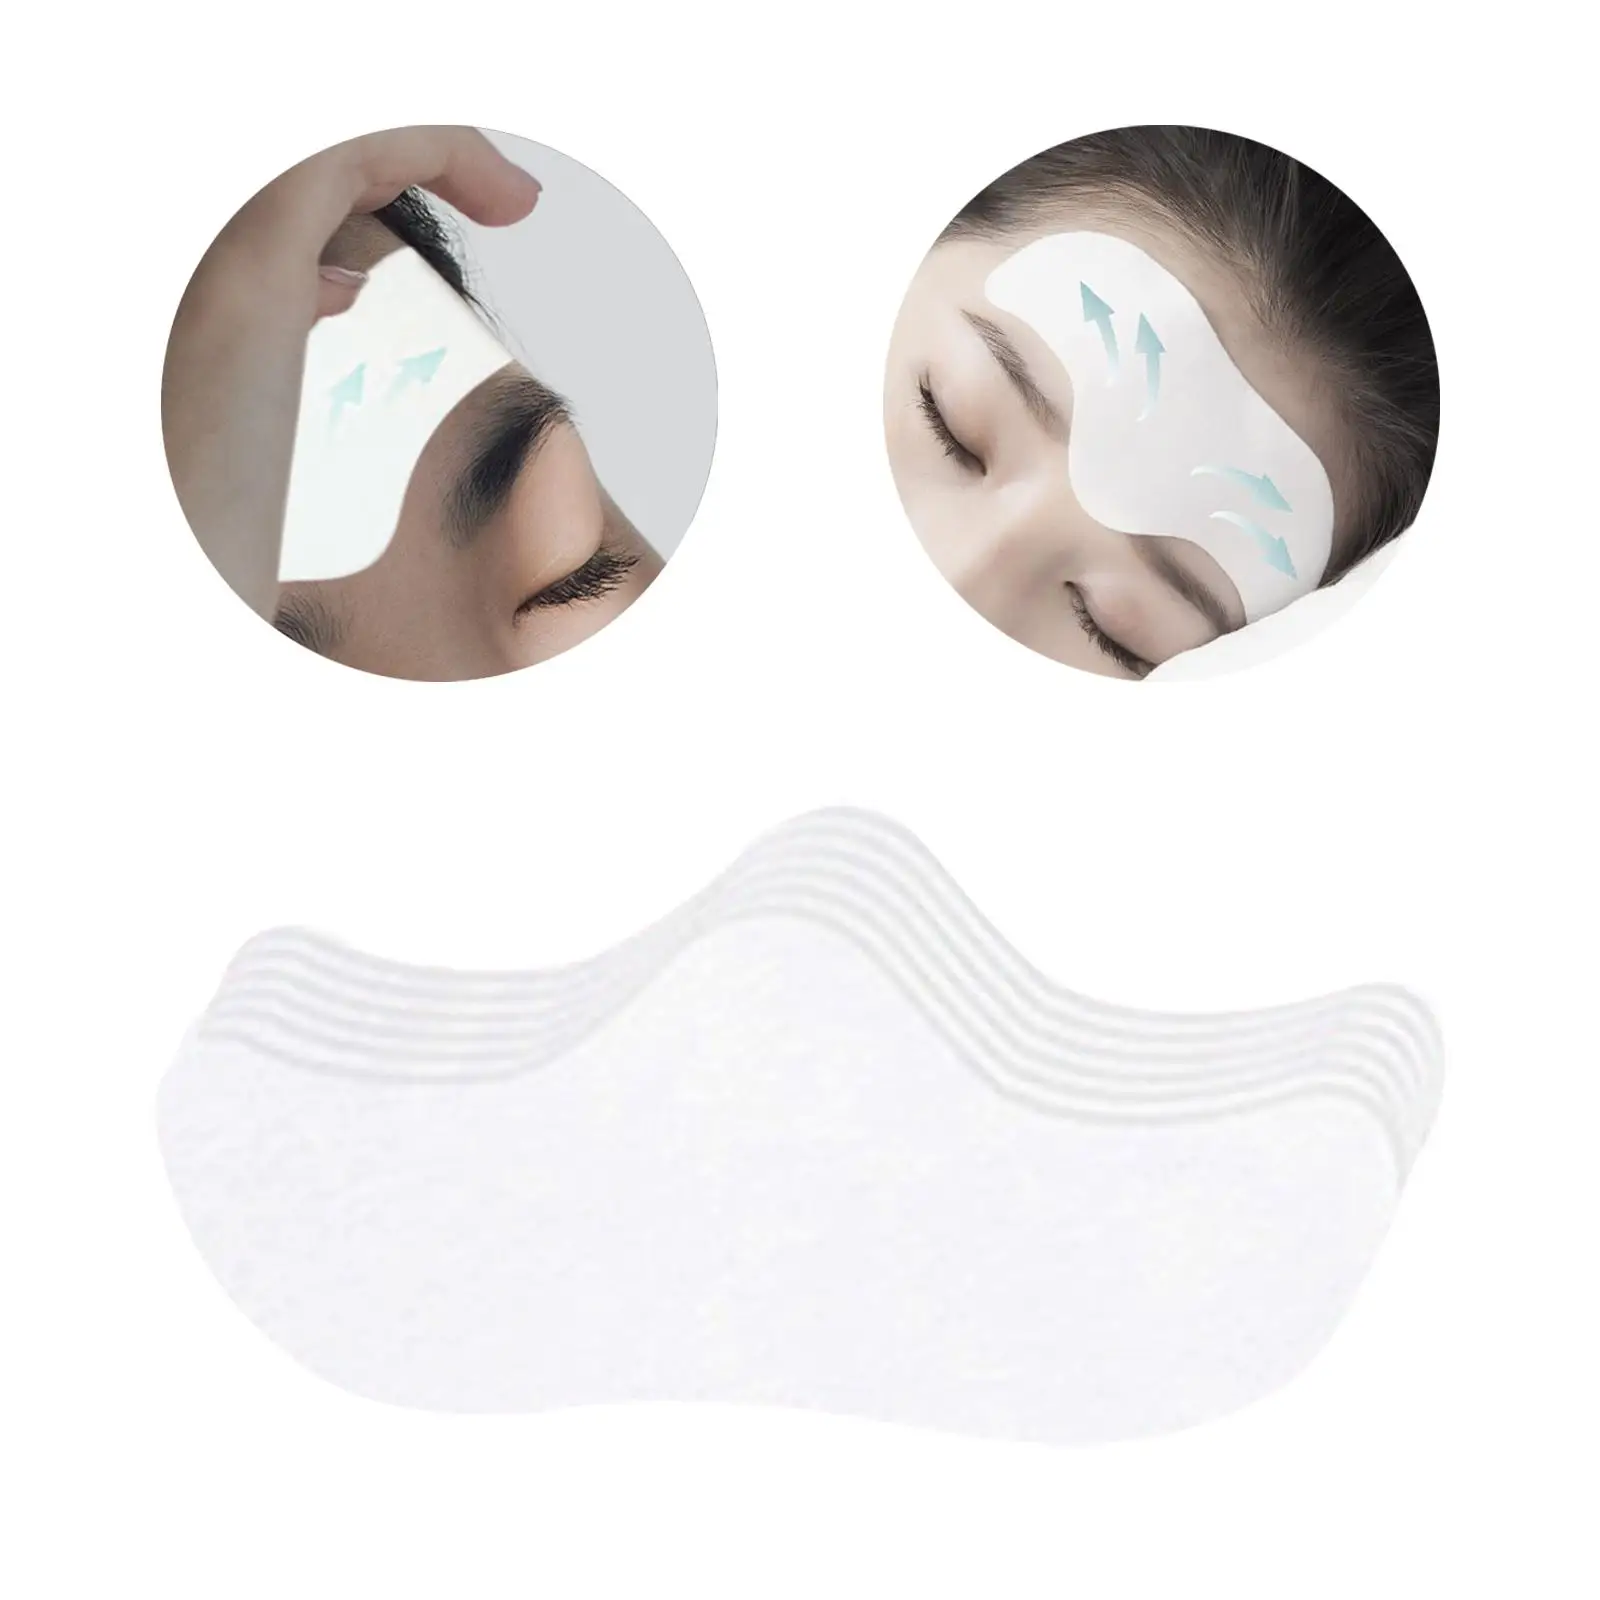 6Pcs Forehead Wrinkle Resistant Patches Face Smoothing Patches for Men Women Forehead Wrinkle Resistant Skin Care Tapes Mask